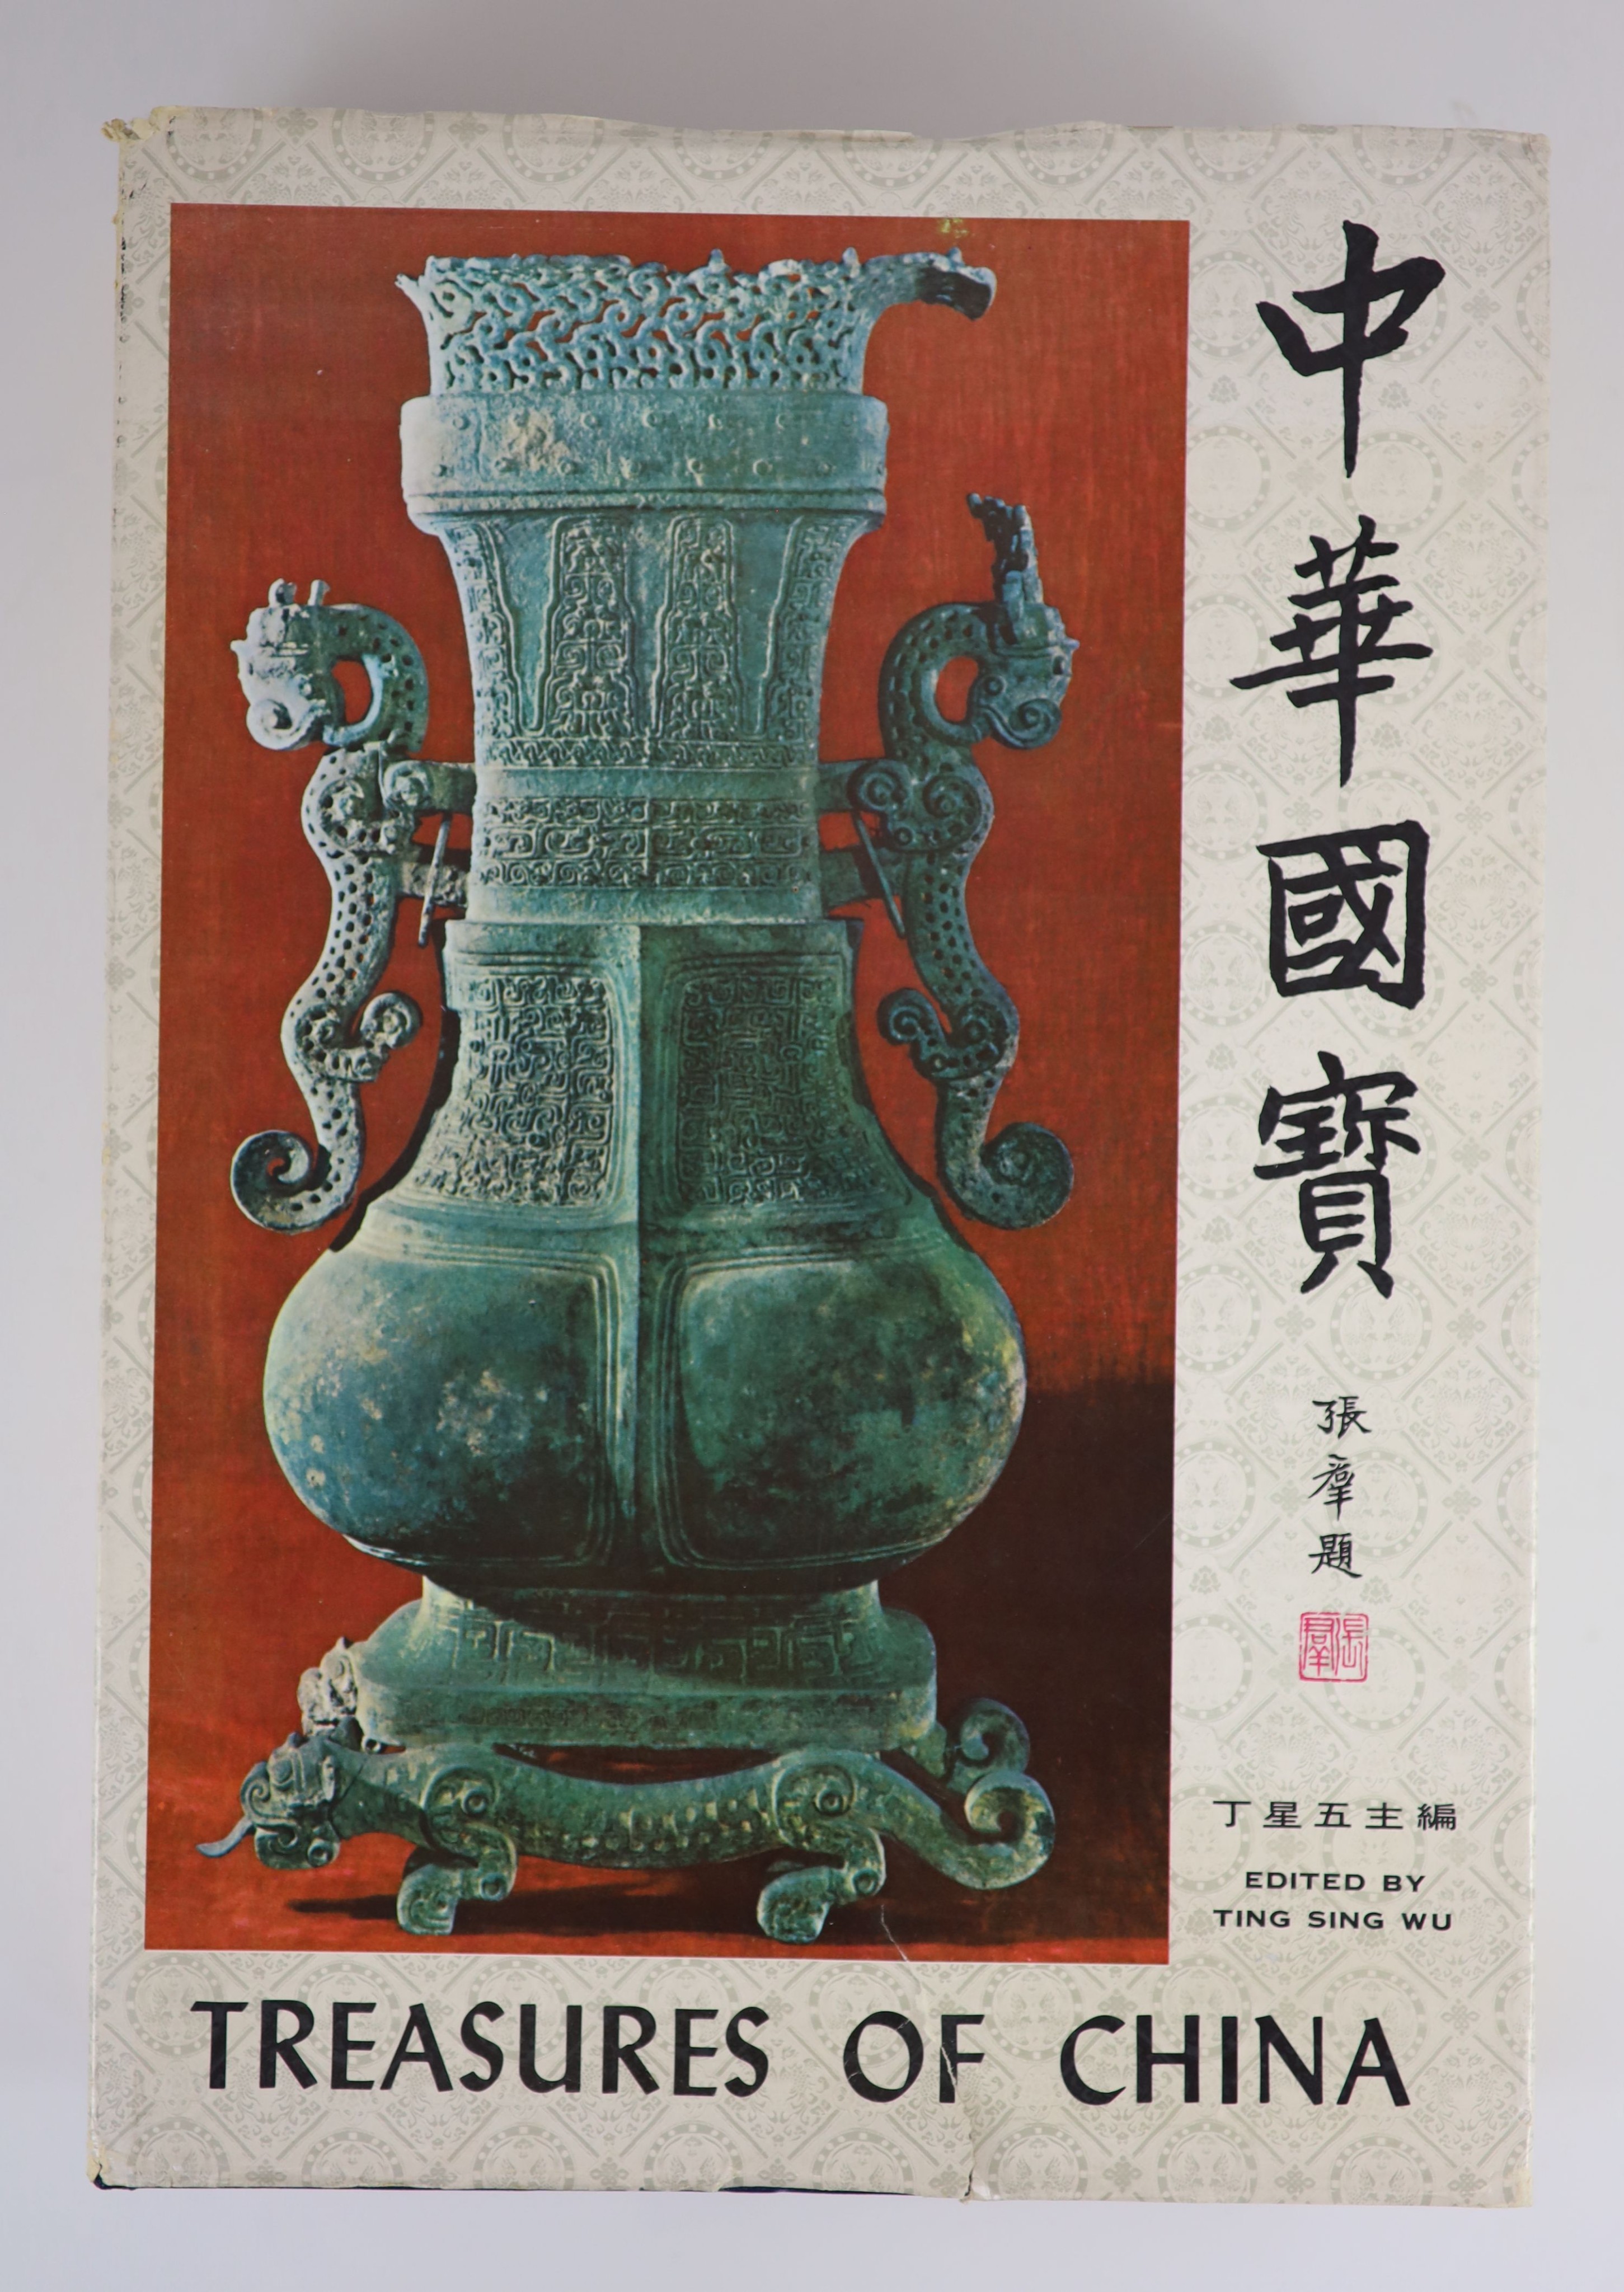 Porcelain of the National Palace - 'Fine Enamelled Ware of the Ching Dynasty and Chien Lung Periods', Vols I & II, published CAFA, 1967 and 'Treasures of China', 1970, two vols (4)